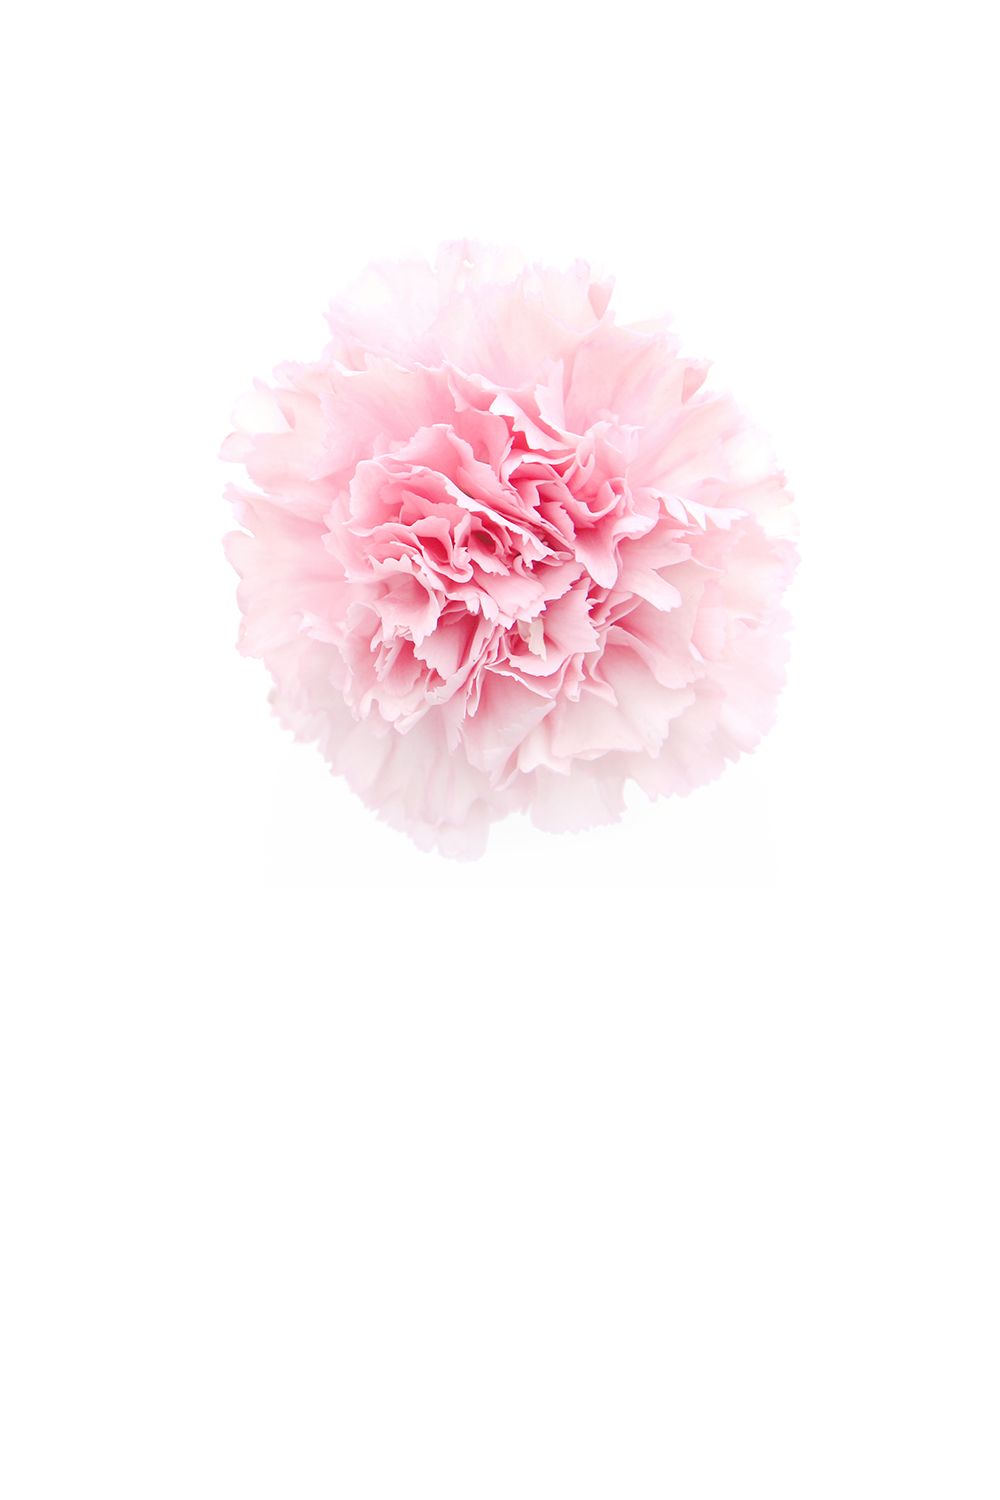 Pink Carnation - Pink Carnation Iphone Background , HD Wallpaper & Backgrounds